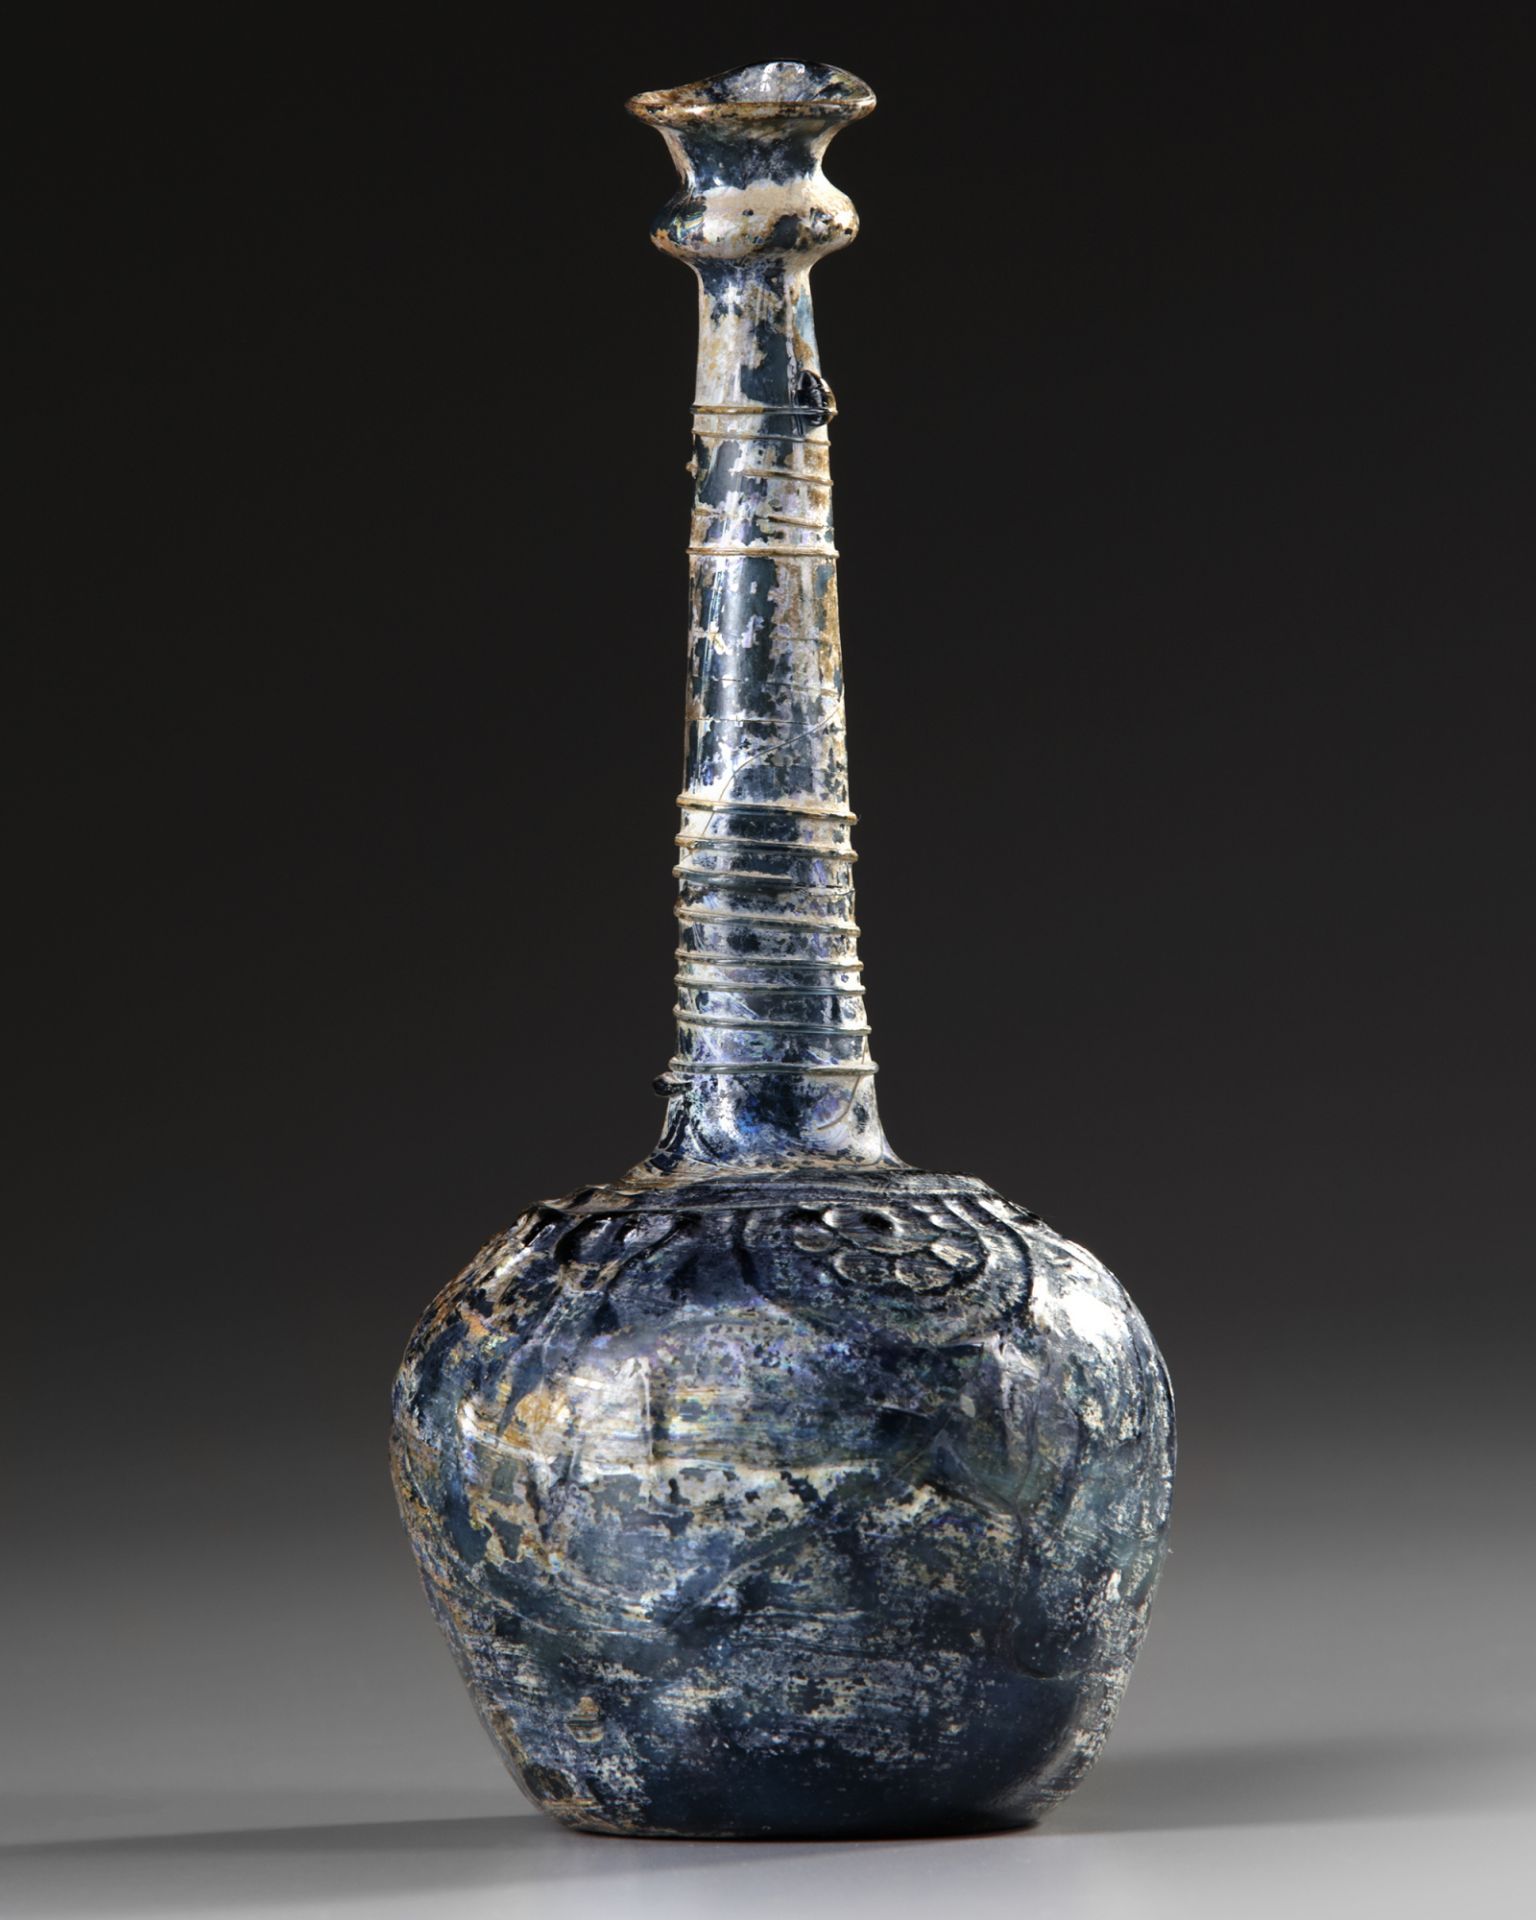 A TALL-NECKED BLUE GLASS BOTTLE, PERSIA OR SYRIA, 11TH-12TH CENTURY - Image 3 of 7